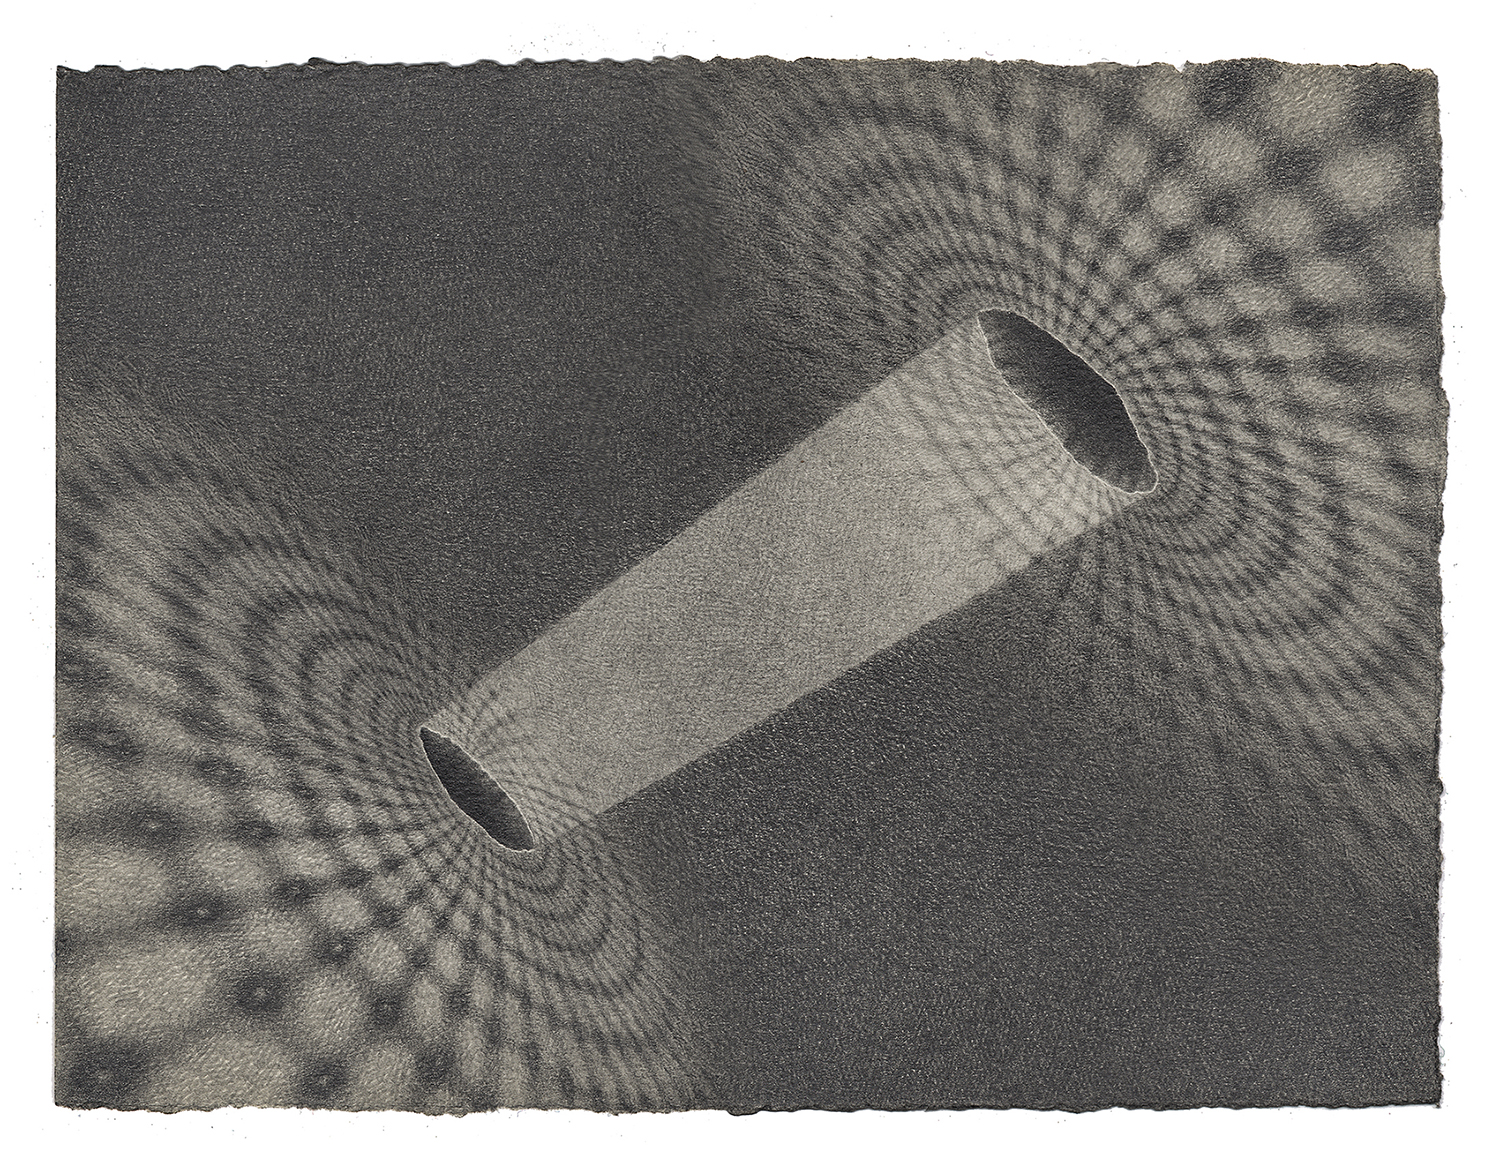 A textured drawing depicting two crater / sinkhole structures with a spotlight connecting the two. Each crater has a swirling gradient whirlpool pattern which blends into the background